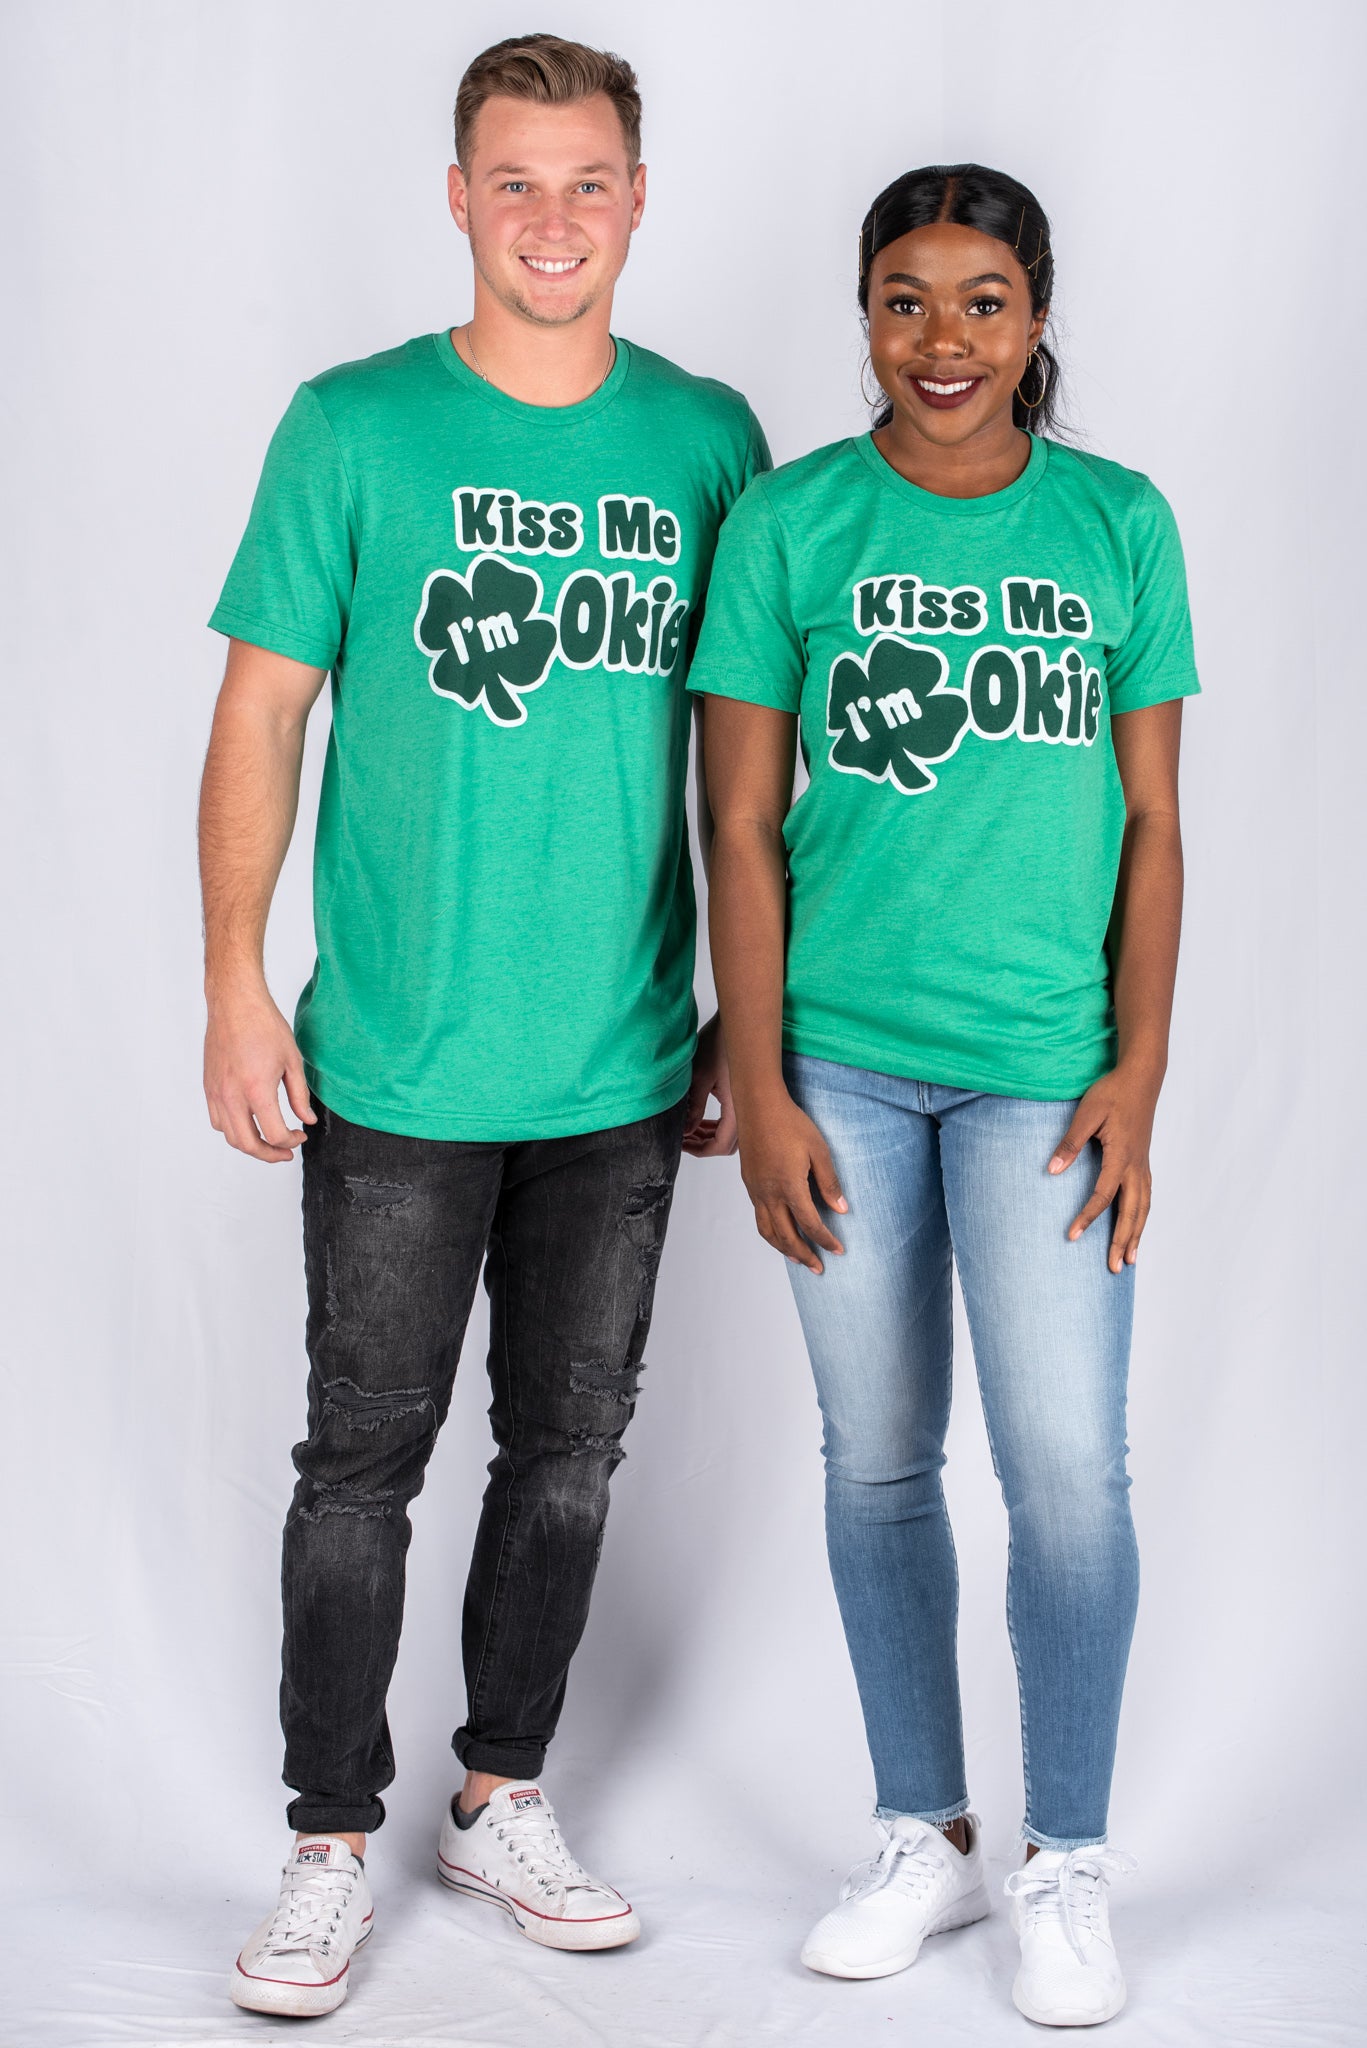 Kiss me I'm Okie unisex short sleeve t-shirt green - Stylish T-shirts - Trendy Graphic T-Shirts and Tank Tops at Lush Fashion Lounge Boutique in Oklahoma City